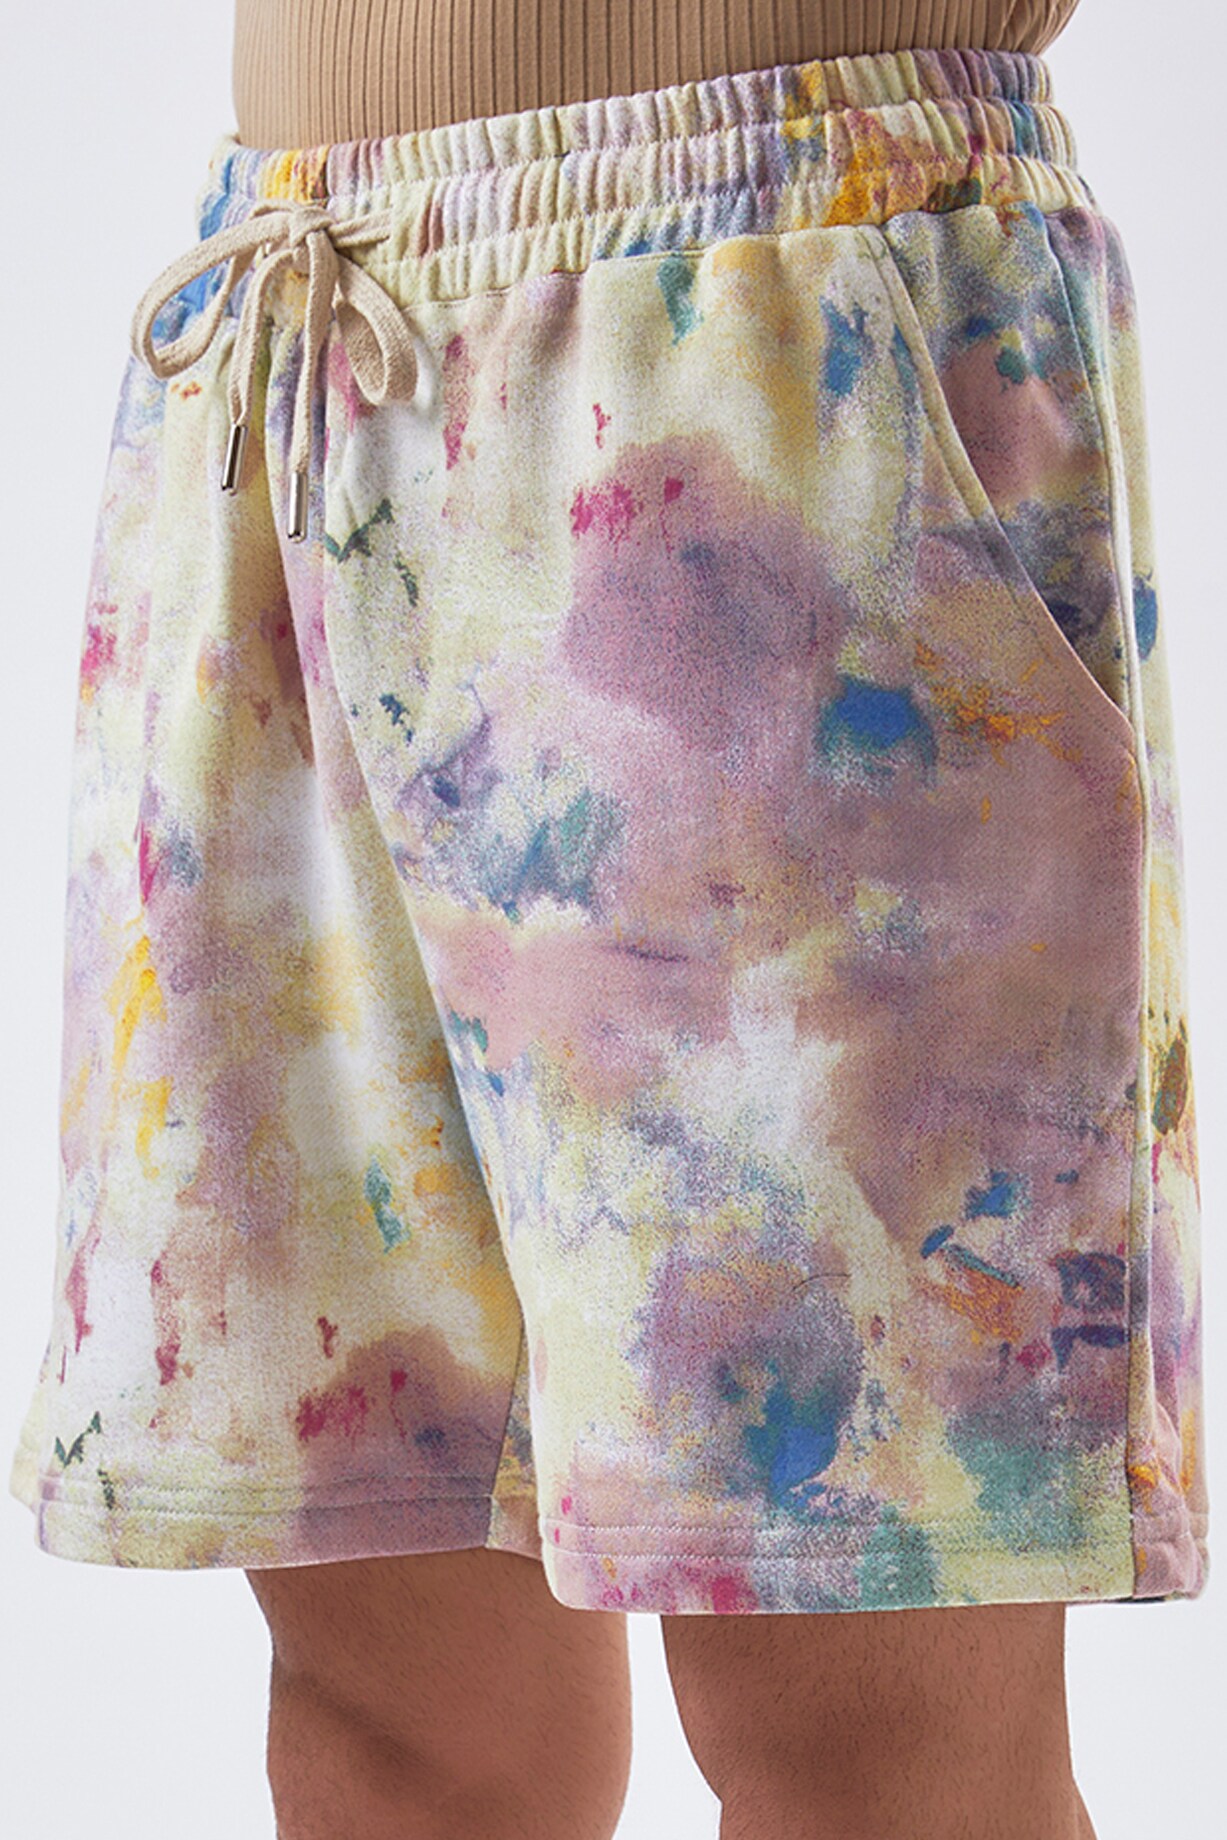 Multi-Colored Cotton Shorts by BACK ALLEY BODEGA